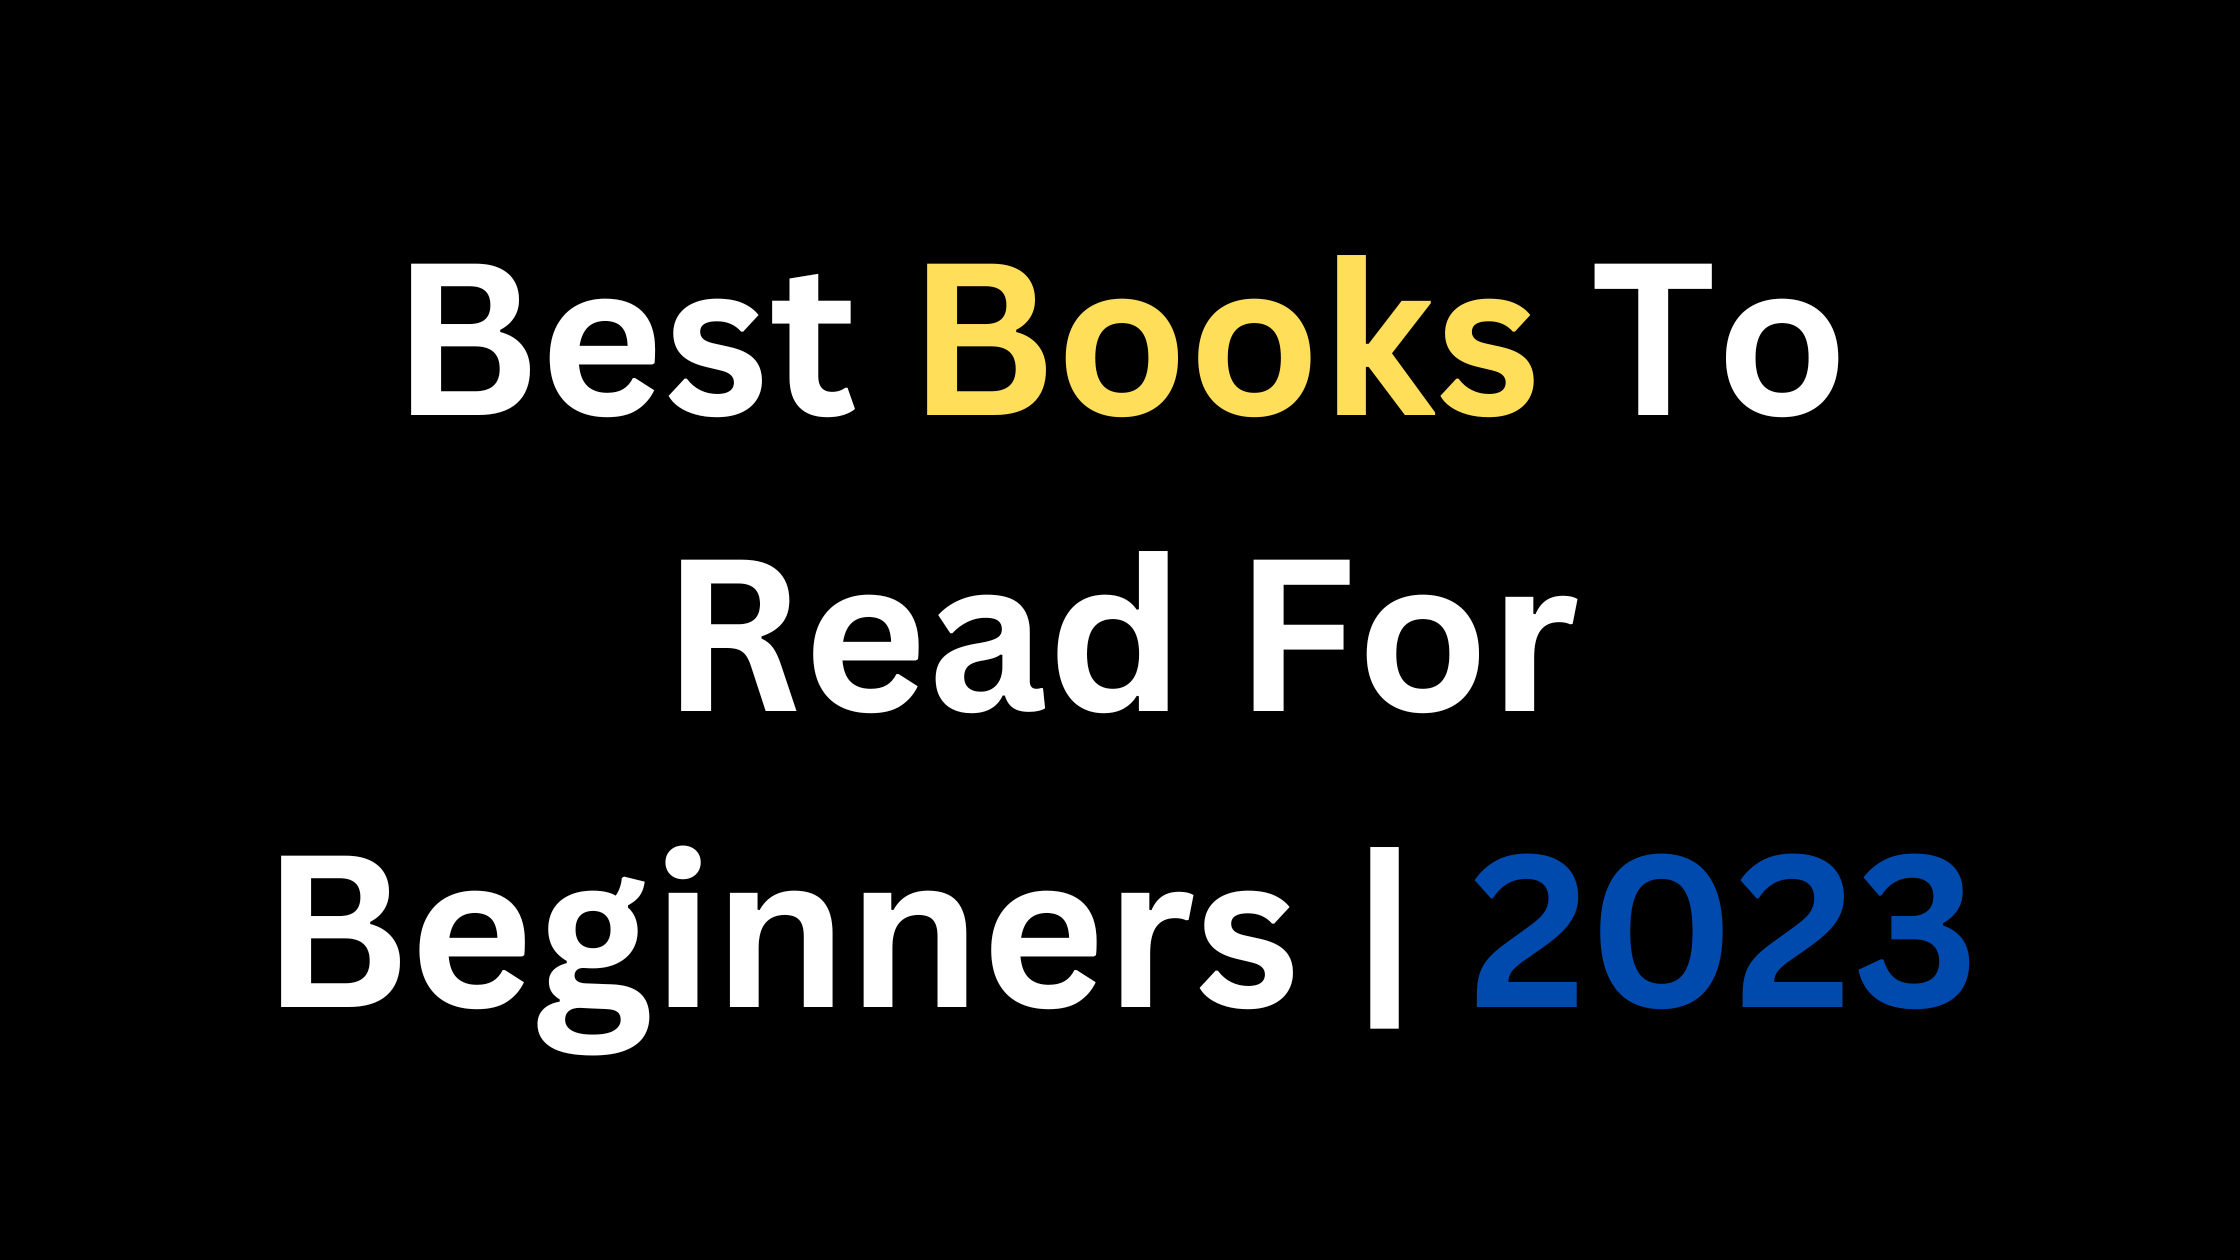 Best Books To Read For Beginners | 2023